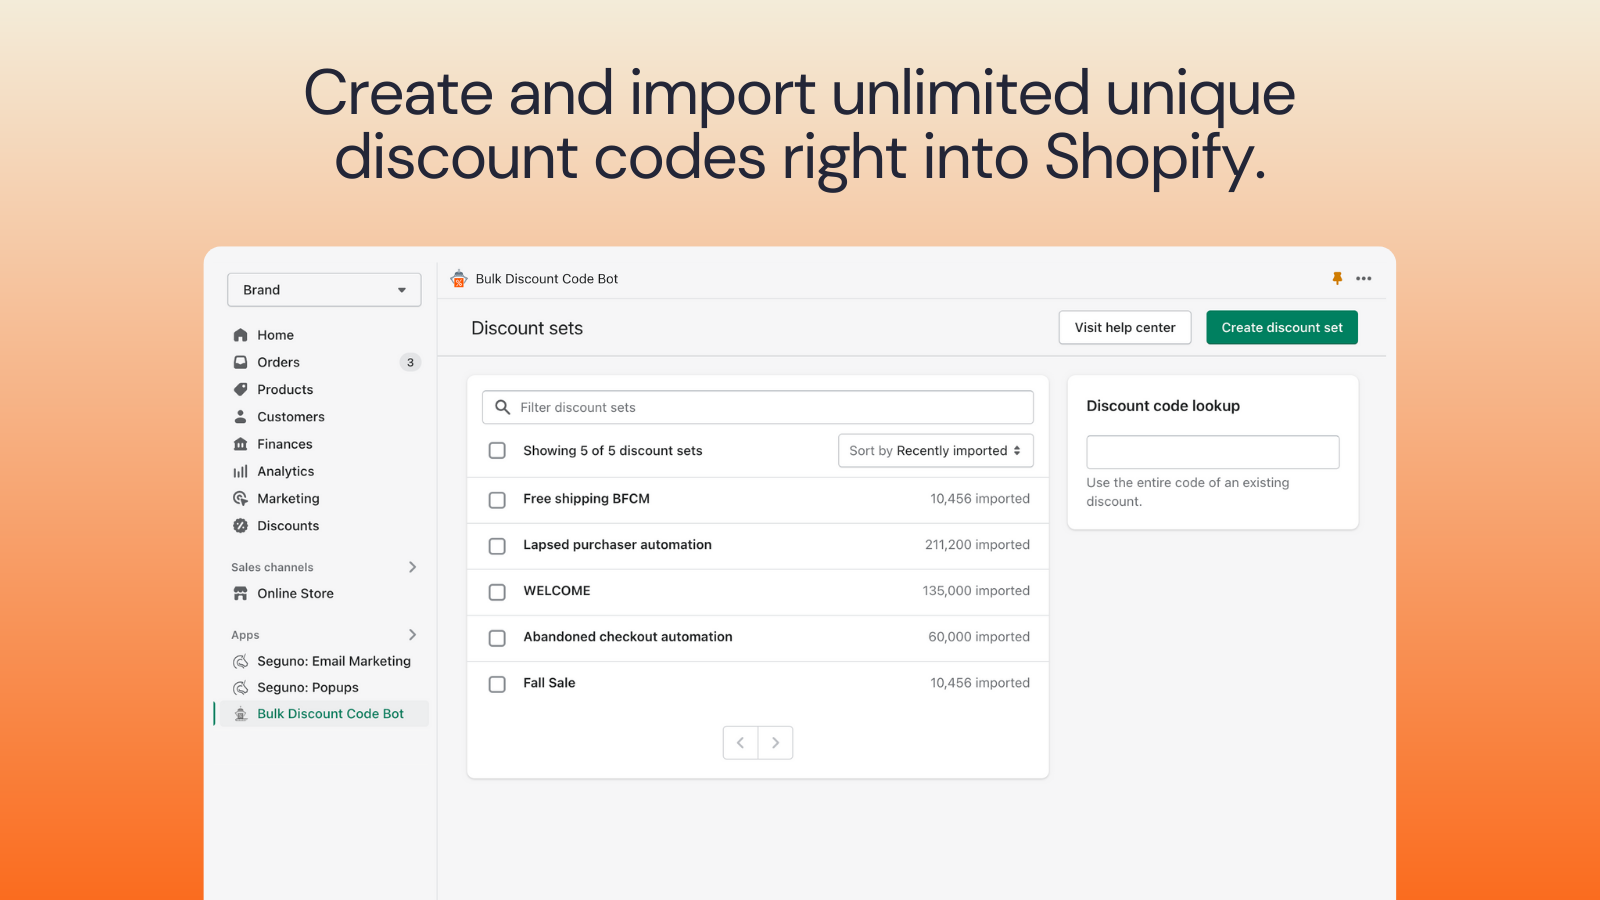 Create and import unlimited unique discount codes into Shopify.